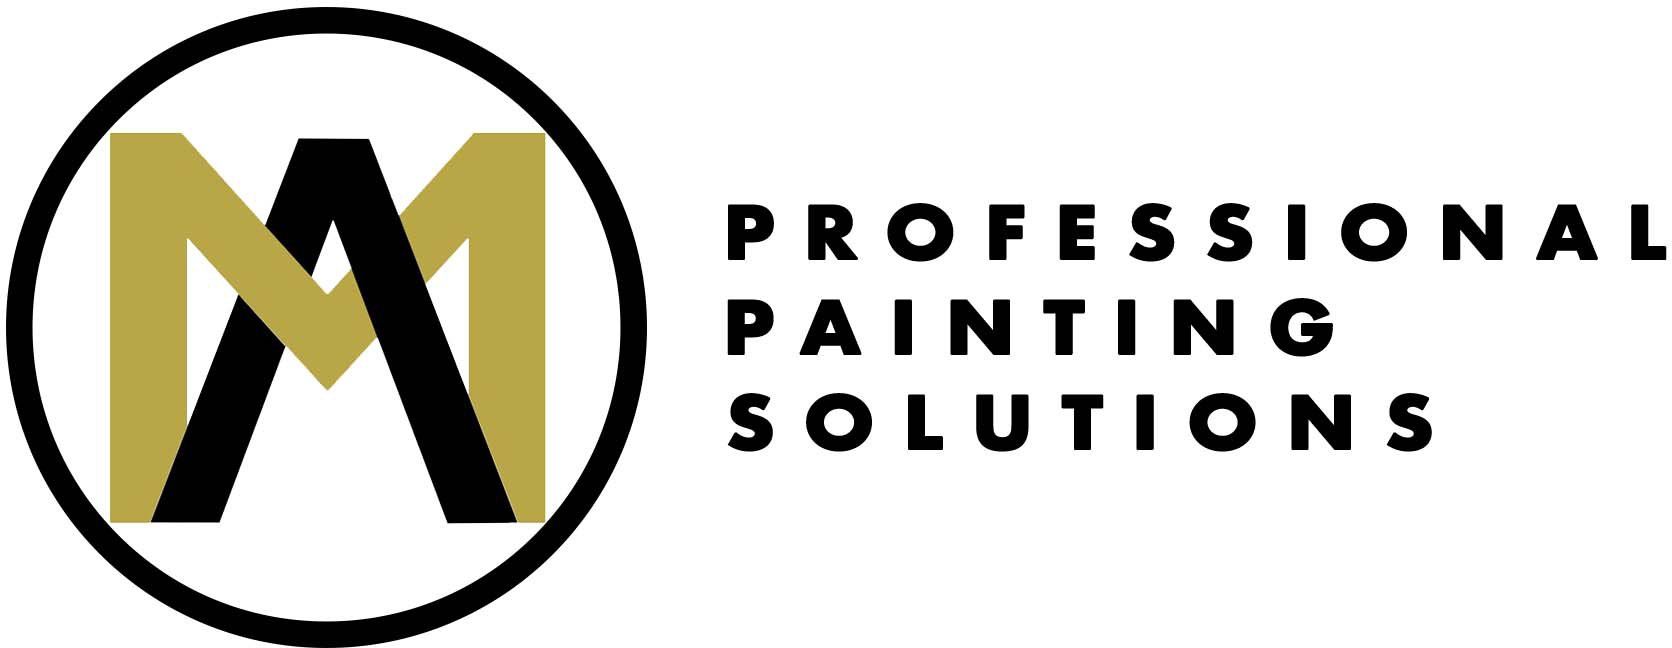 A&M Professional Painting Solutions